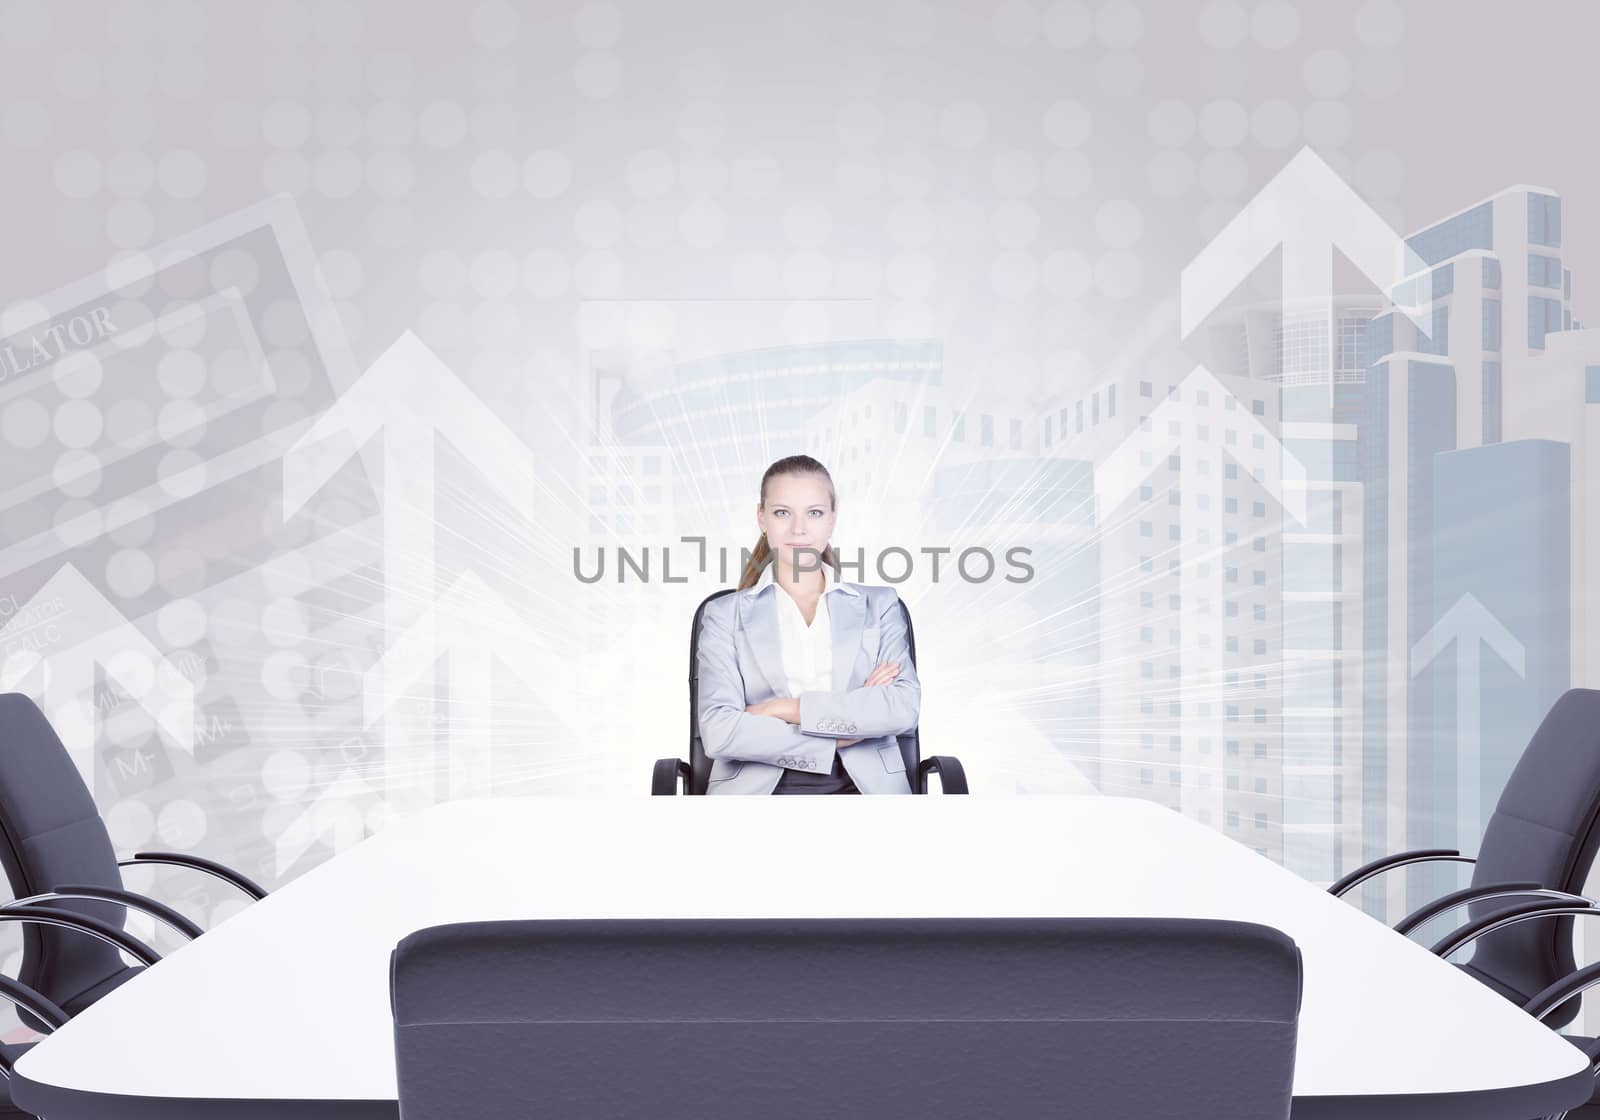 Successful businesswoman sitting at table and looking at camera on abstract light background with up arrows